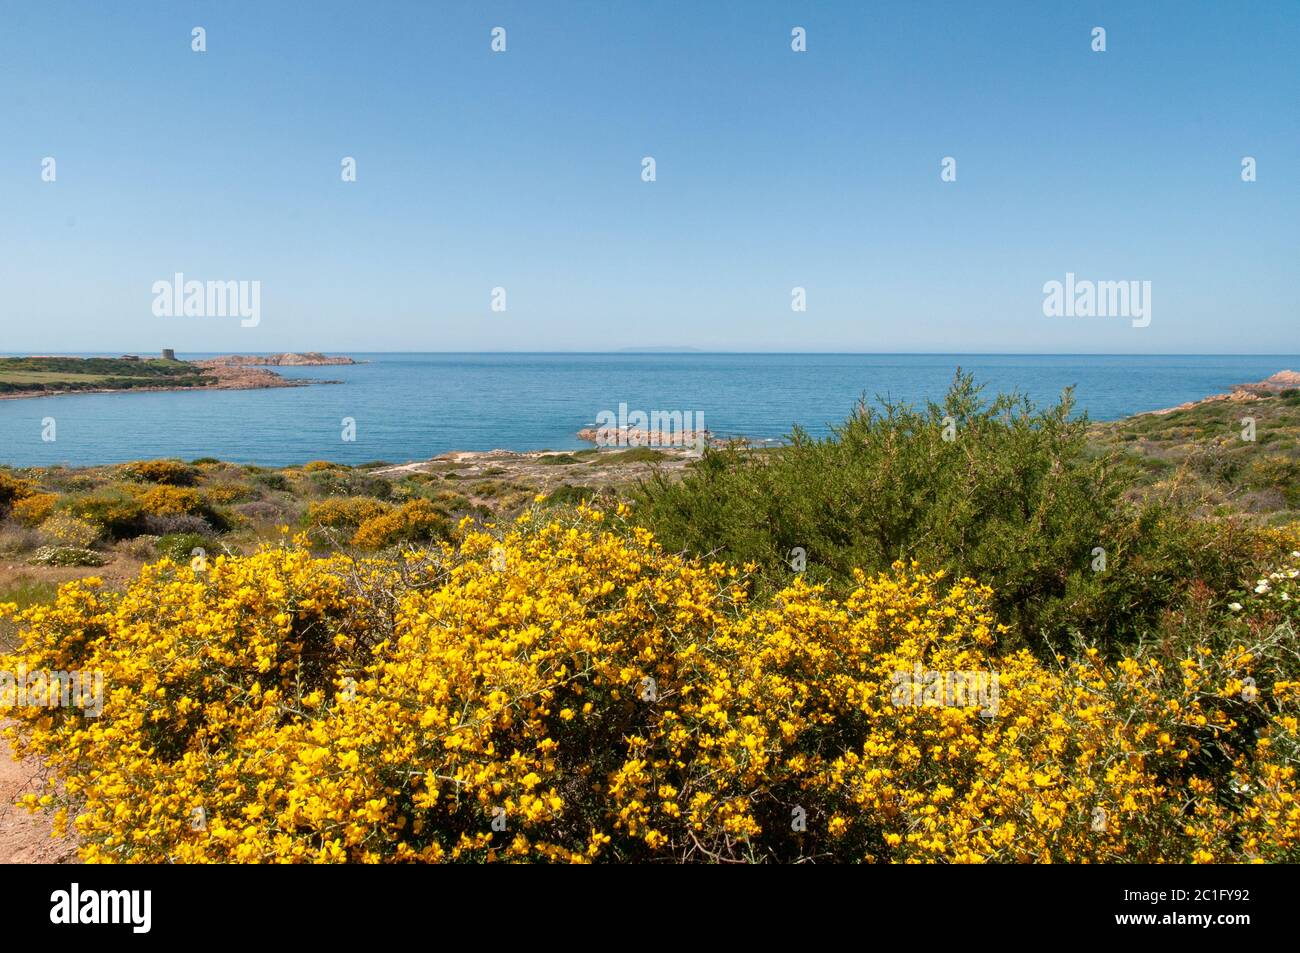 Beautiful Mediterranean yellow bush of flowers of French Broom (Genista monspessulana) with sea and horizon in the background Stock Photo